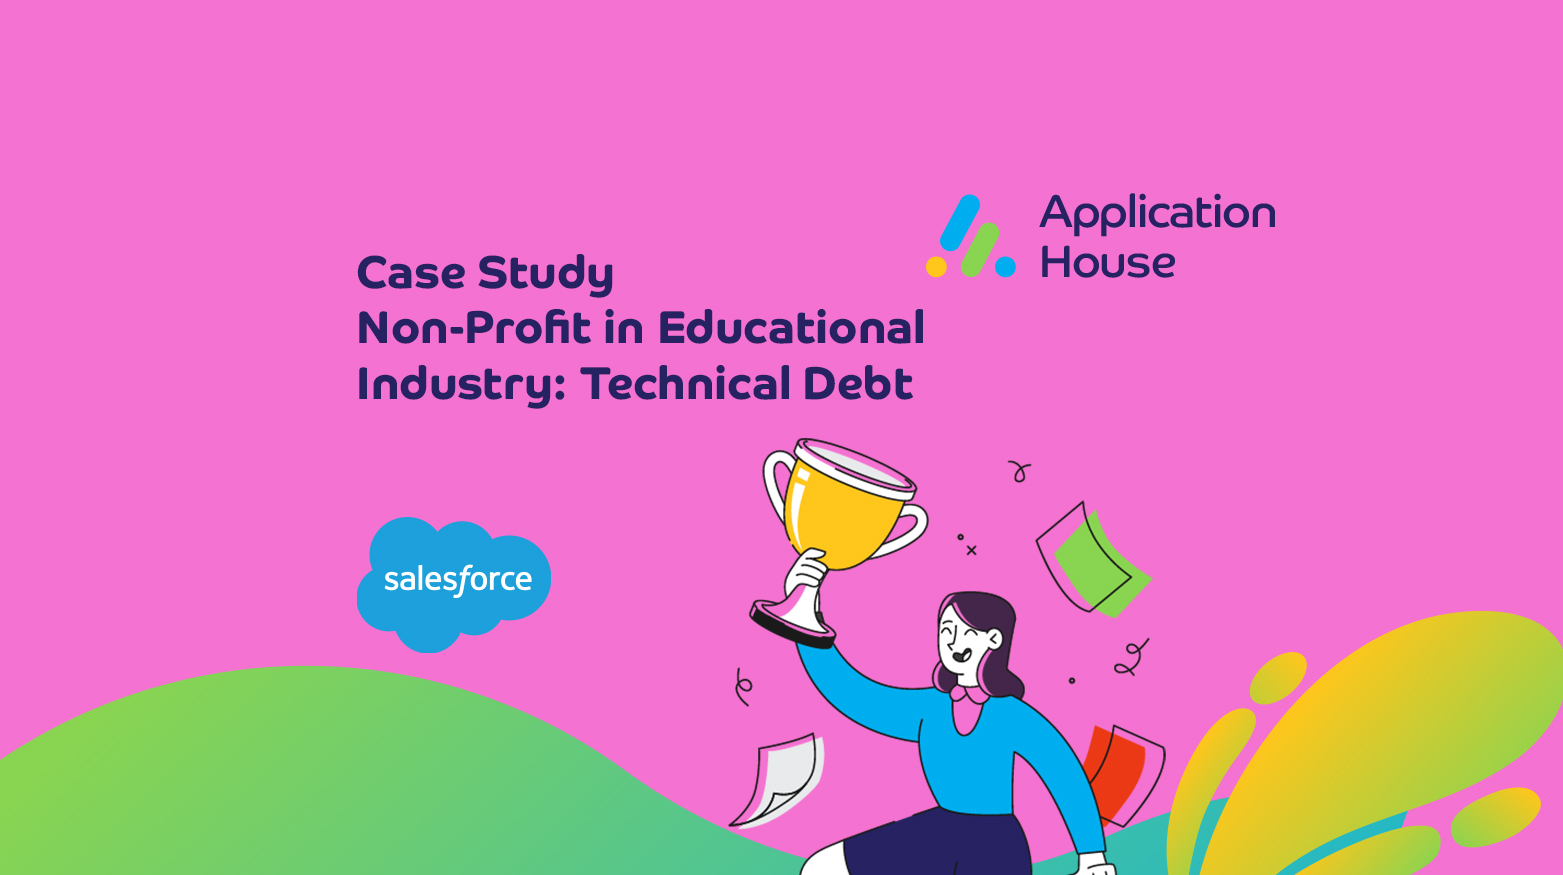 Salesforce Case Study Non-Profit in Educational Industry Technical Debt